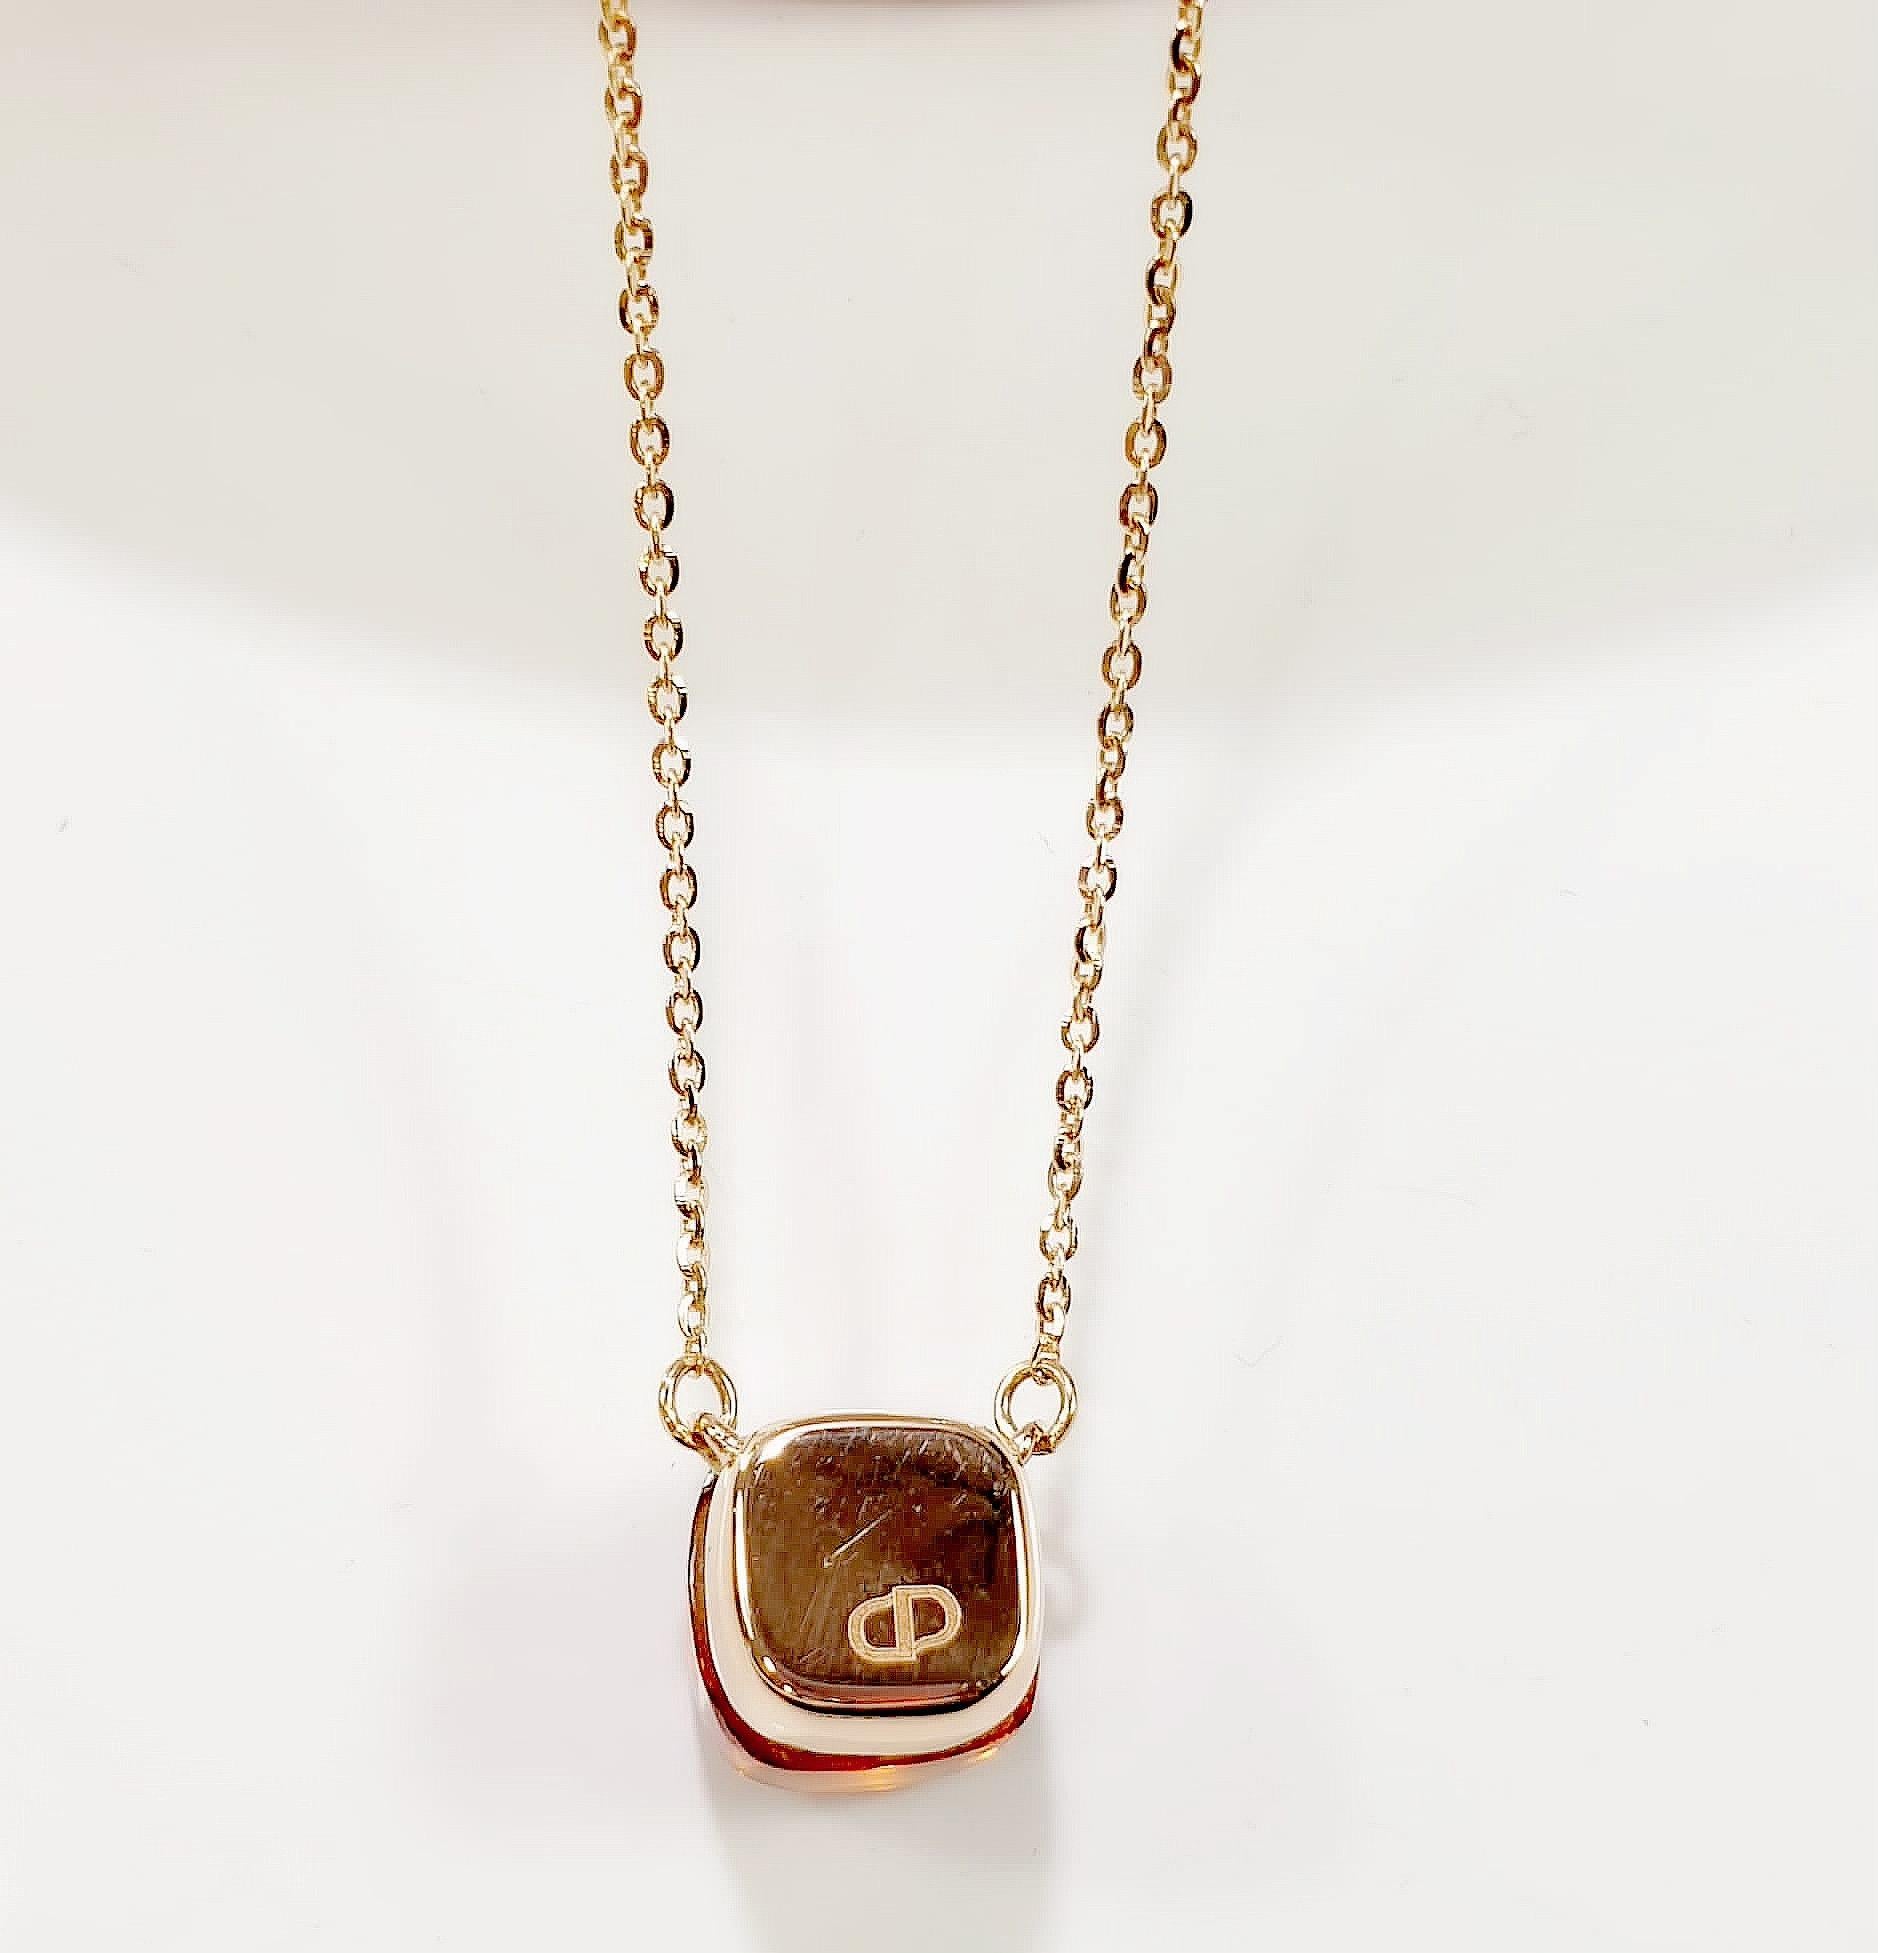 Orange Quartz 18kt gold pendant chain
 “Nudo” stone, available in a range of 18 stunning colors
18kt gold chain 
READY TO SHIP
*Shipment of this piece is not affected by COVID-19. Orders welcome!

MATERIAL
◘ Weight gold 4,5 grams with stone 5,9grams